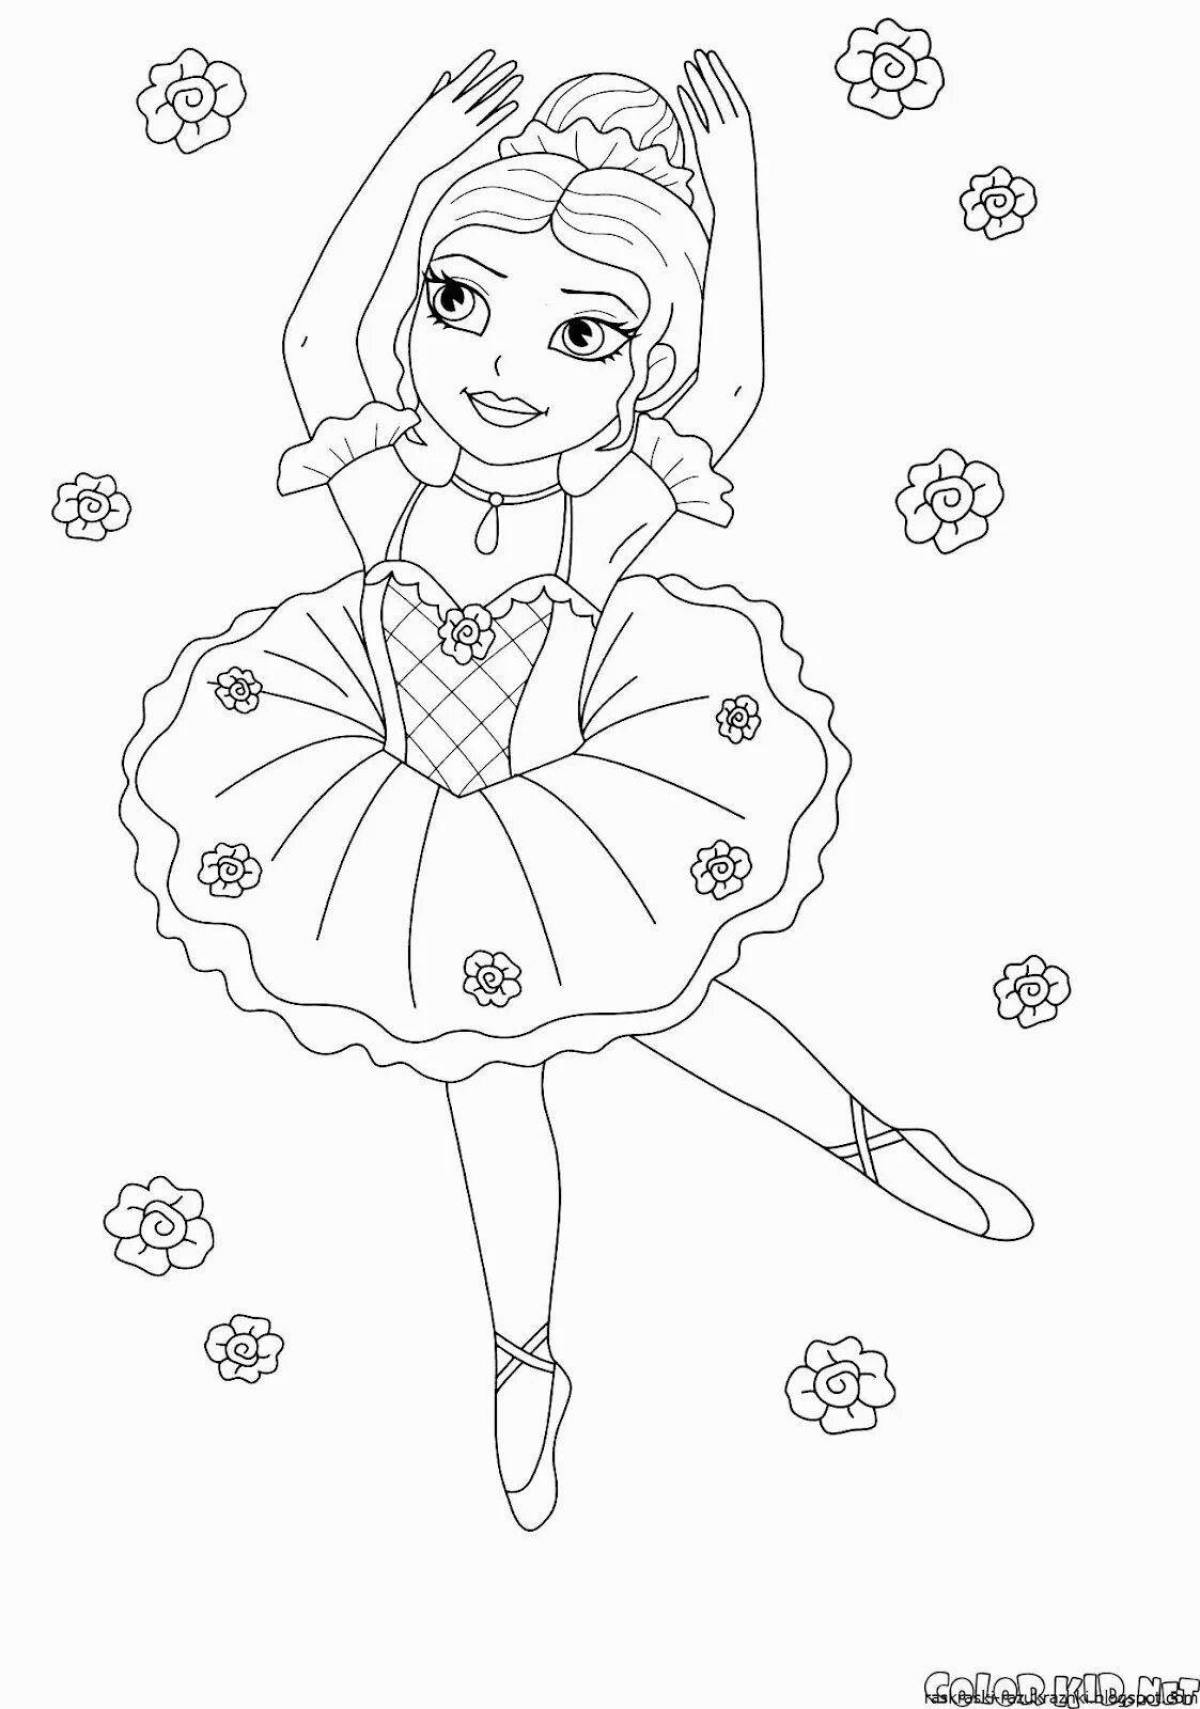 Amazing ballerina coloring pages for girls